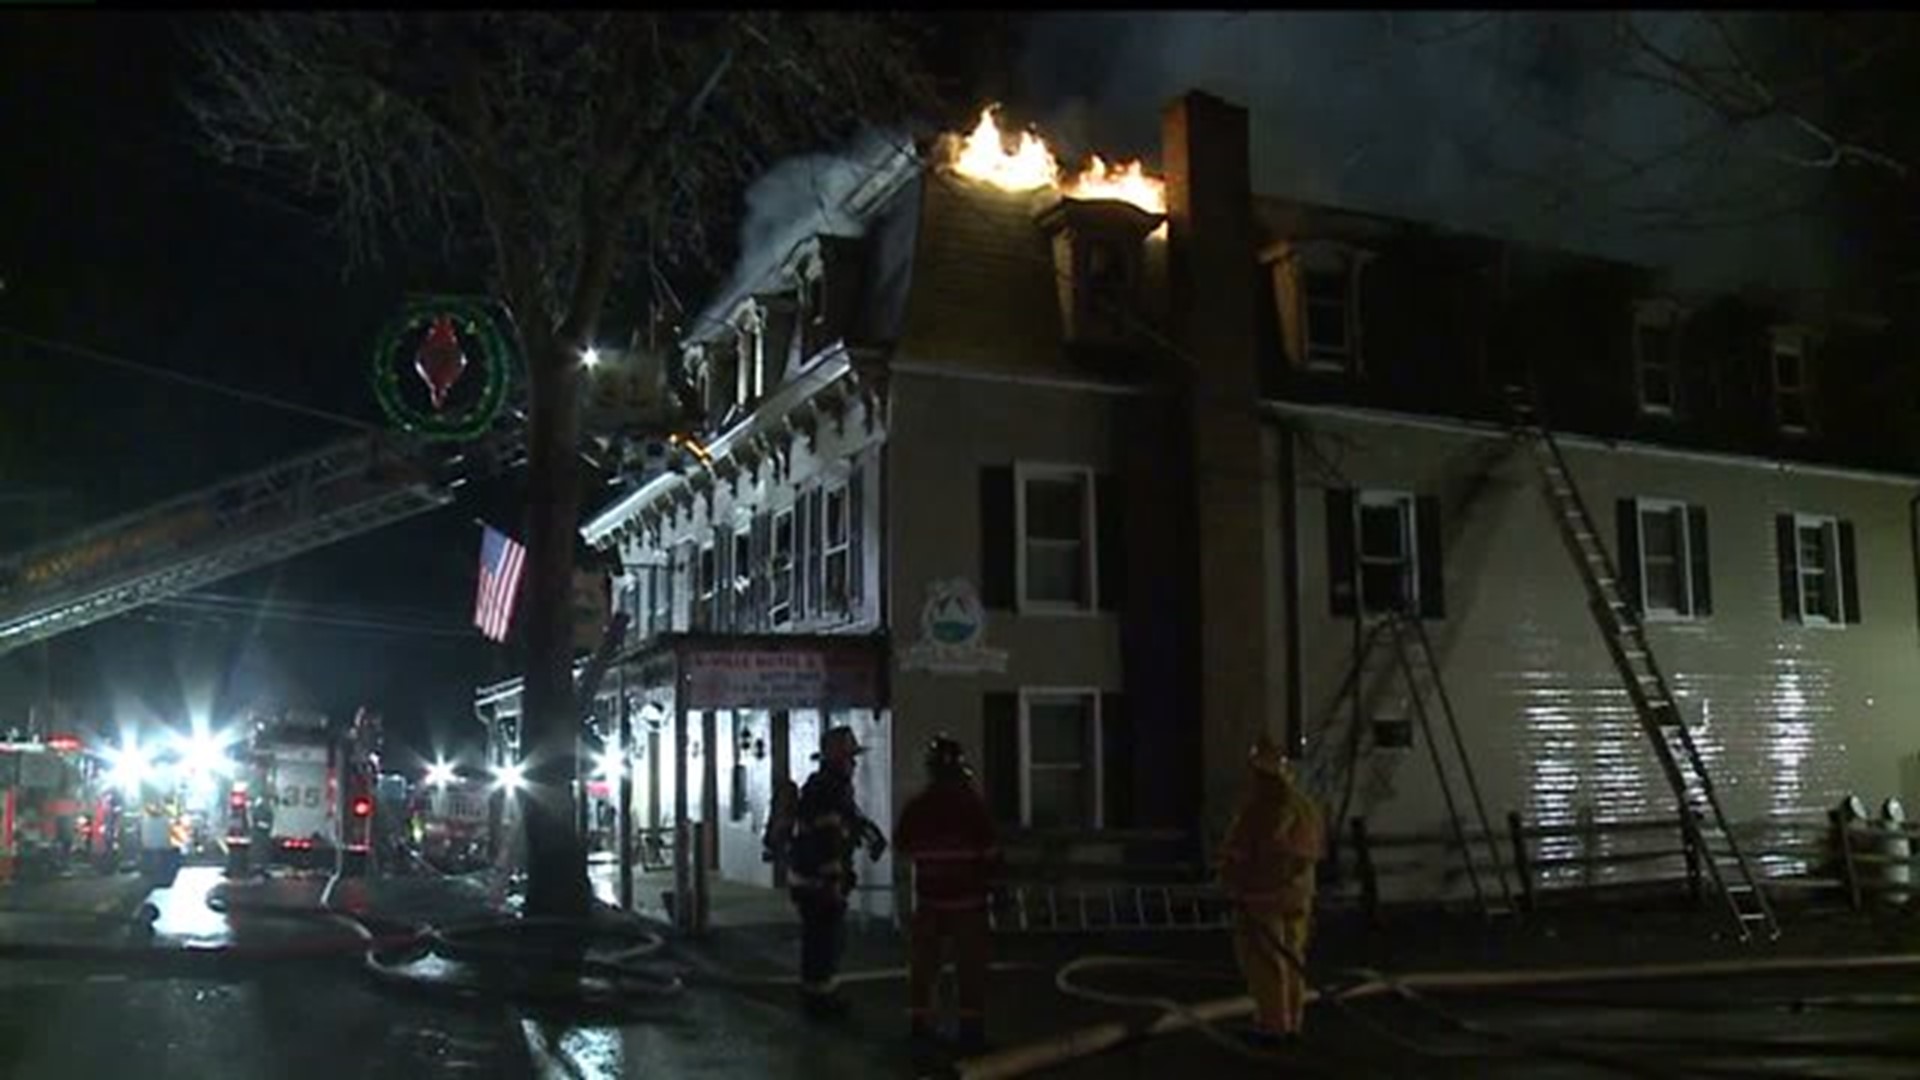 Overnight fire breaks out at Lebanon County hotel